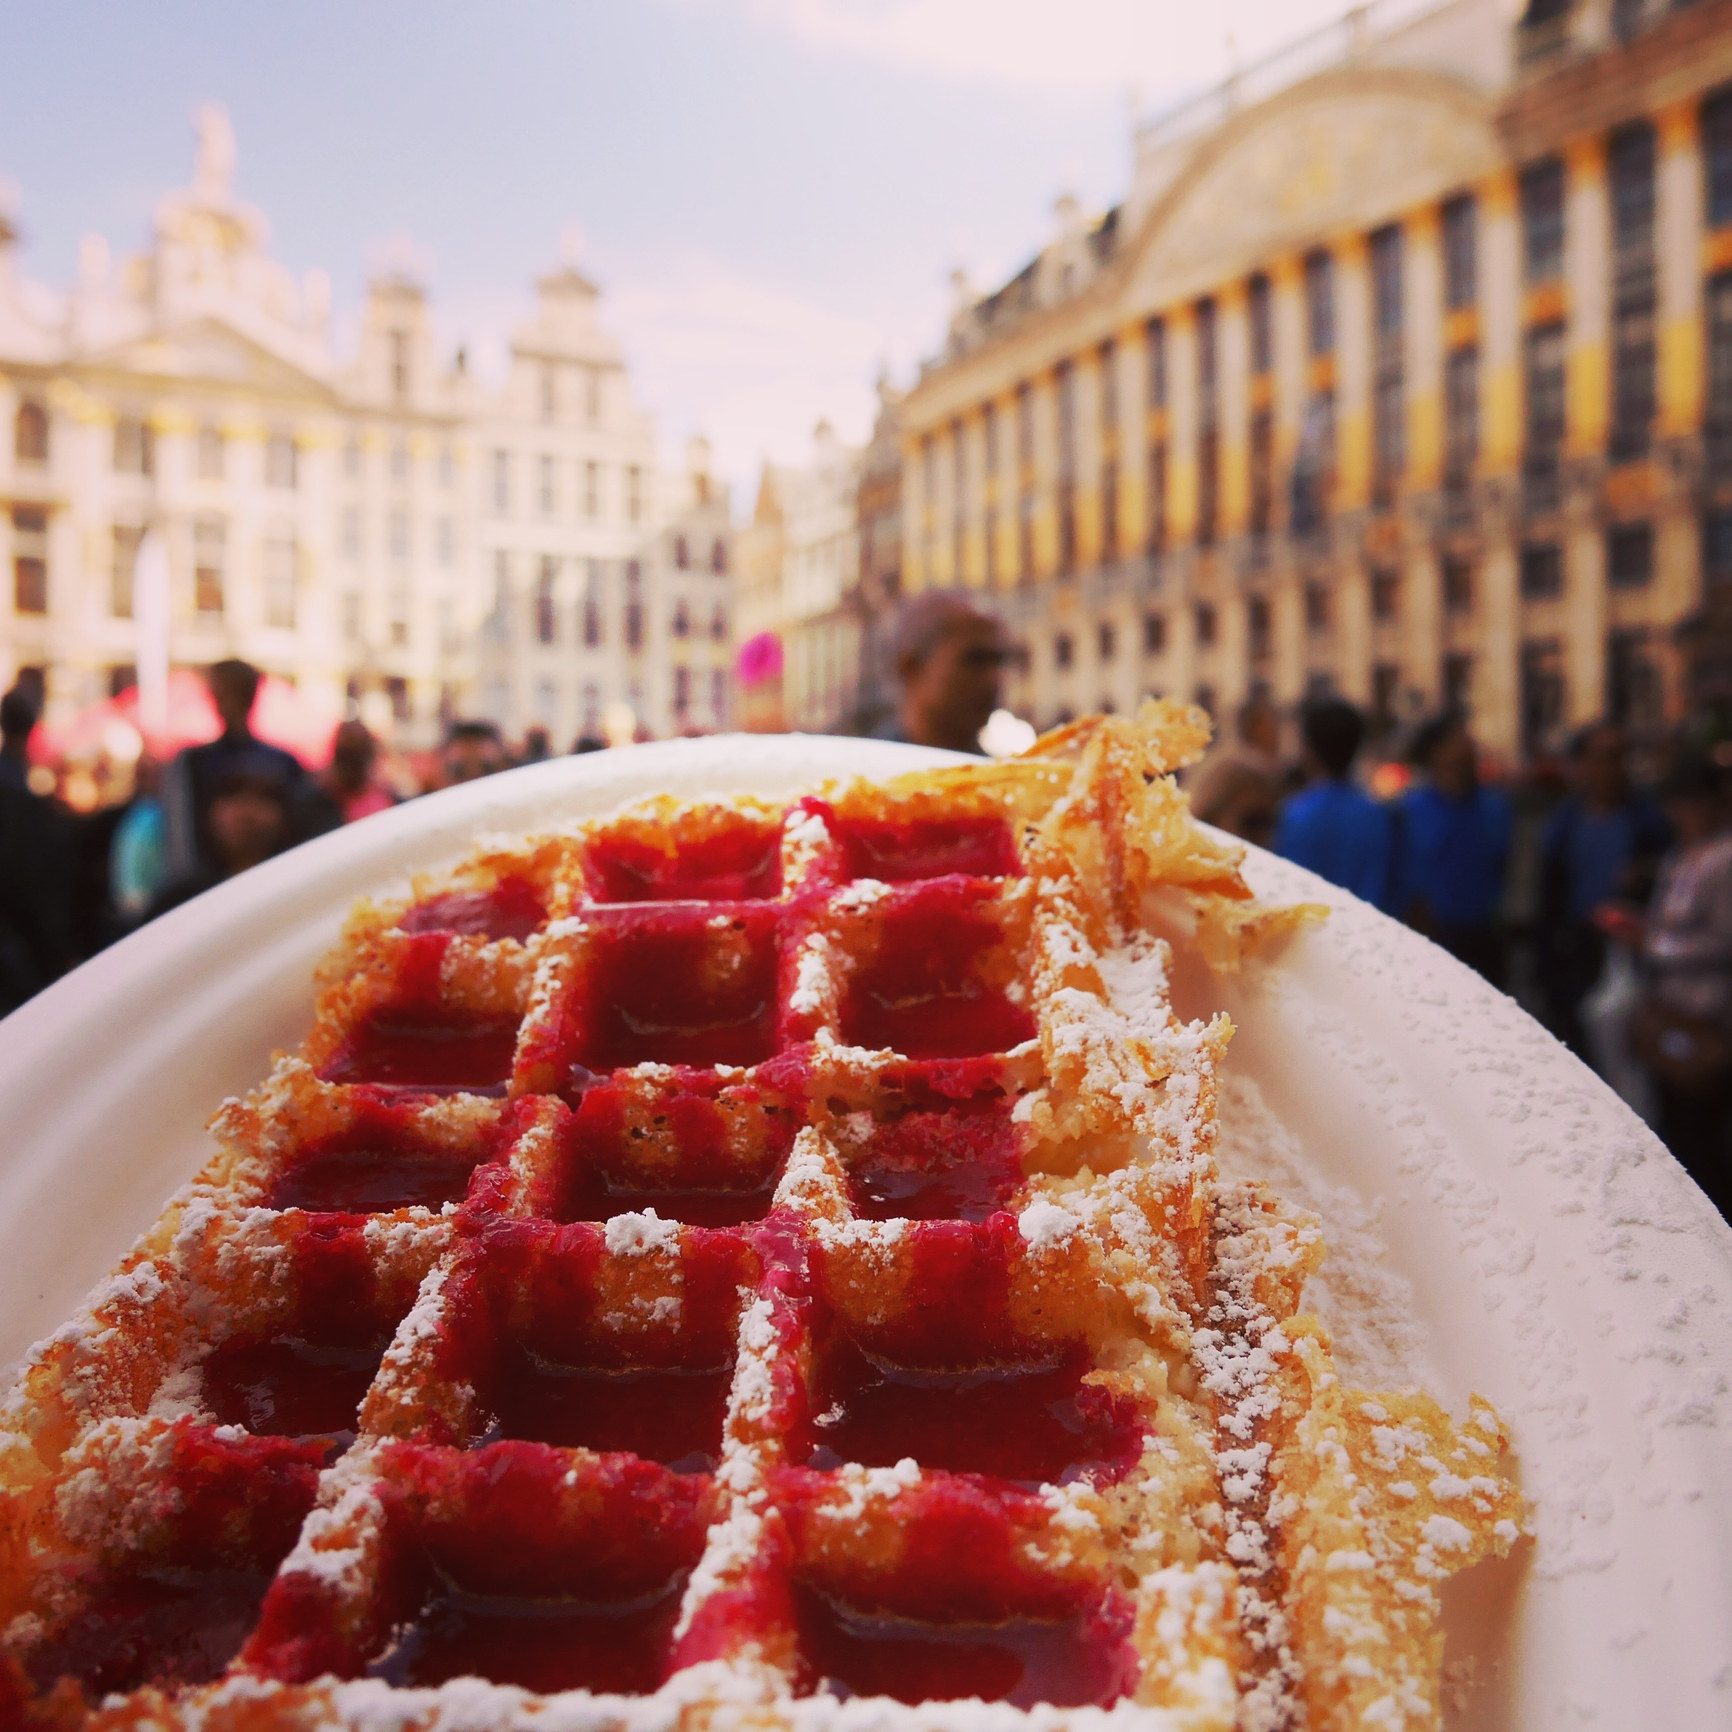 A close-up of a waffle with a city view in the backdrop.